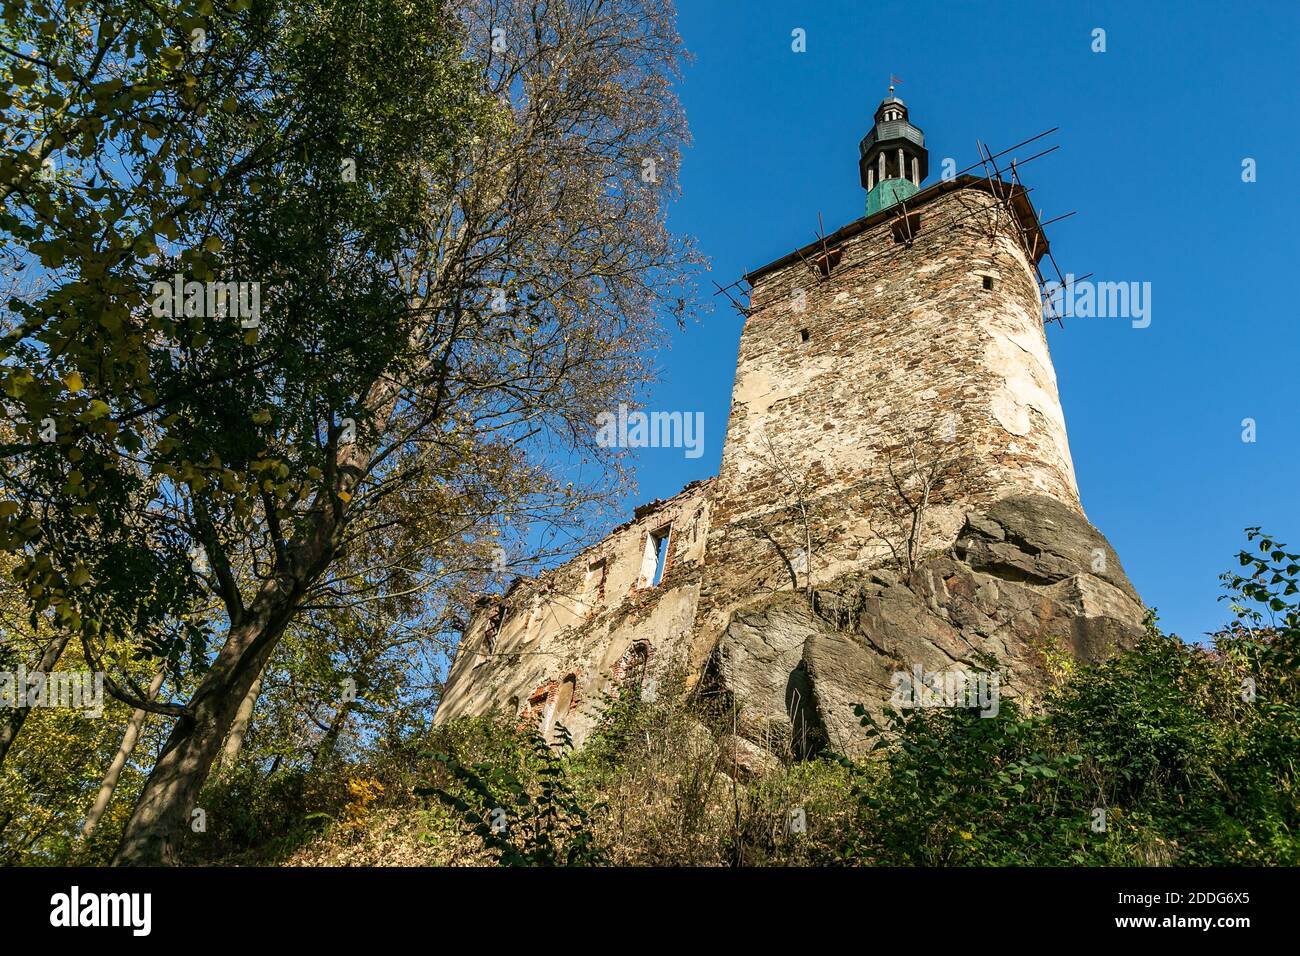 Hartenberg, Czech Republic - October 14 2018: View of a tower as a part of the ruined gothic castle in reconstruction standing on a rock. Trees around. Stock Photo